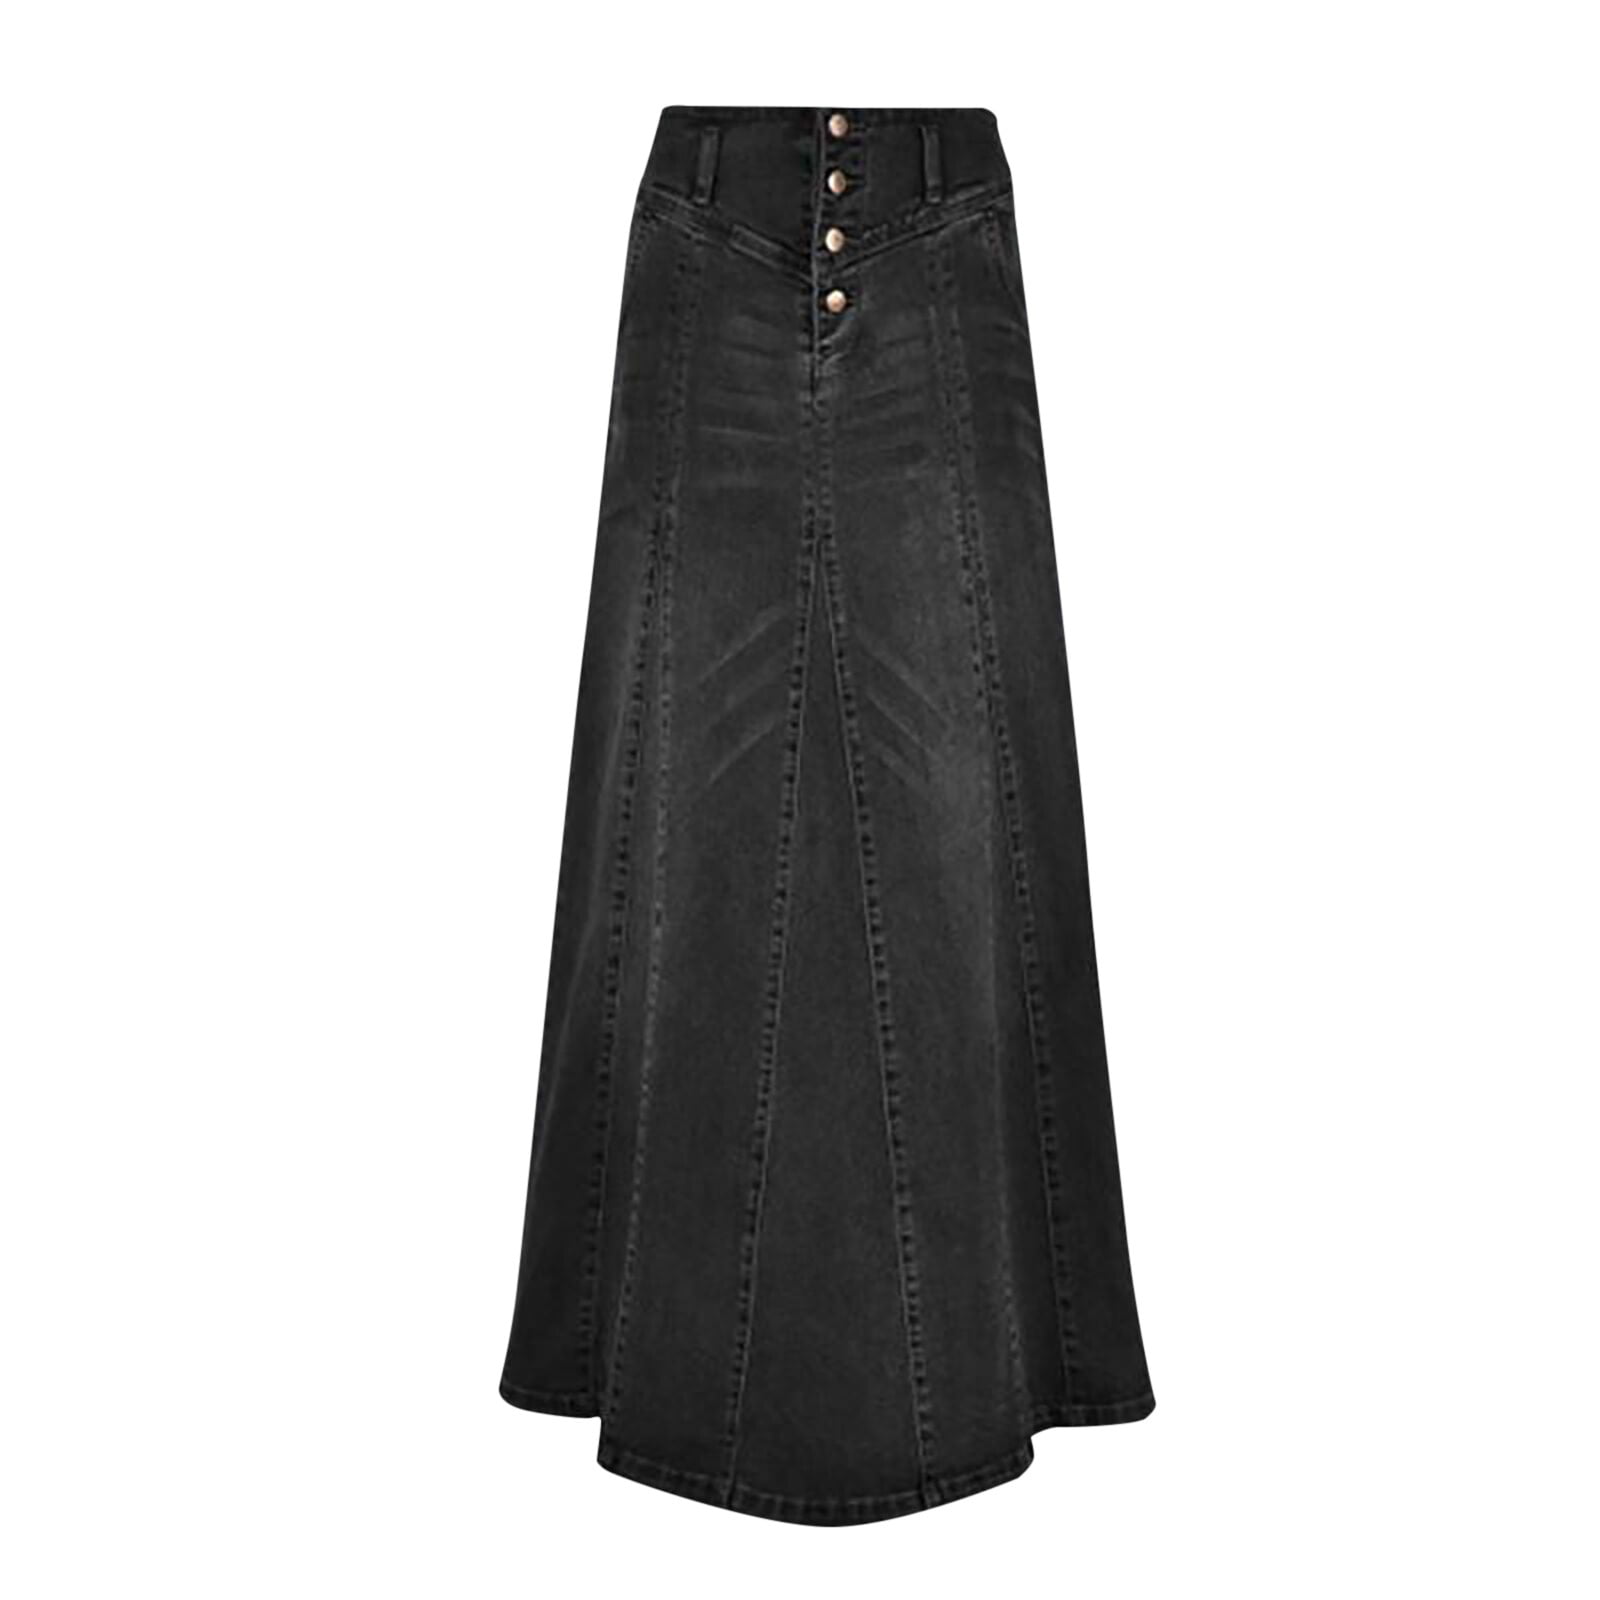 Uuszgmr Womens Skirts Retro Exposure Button Fly Packaged A Line Maxi ...